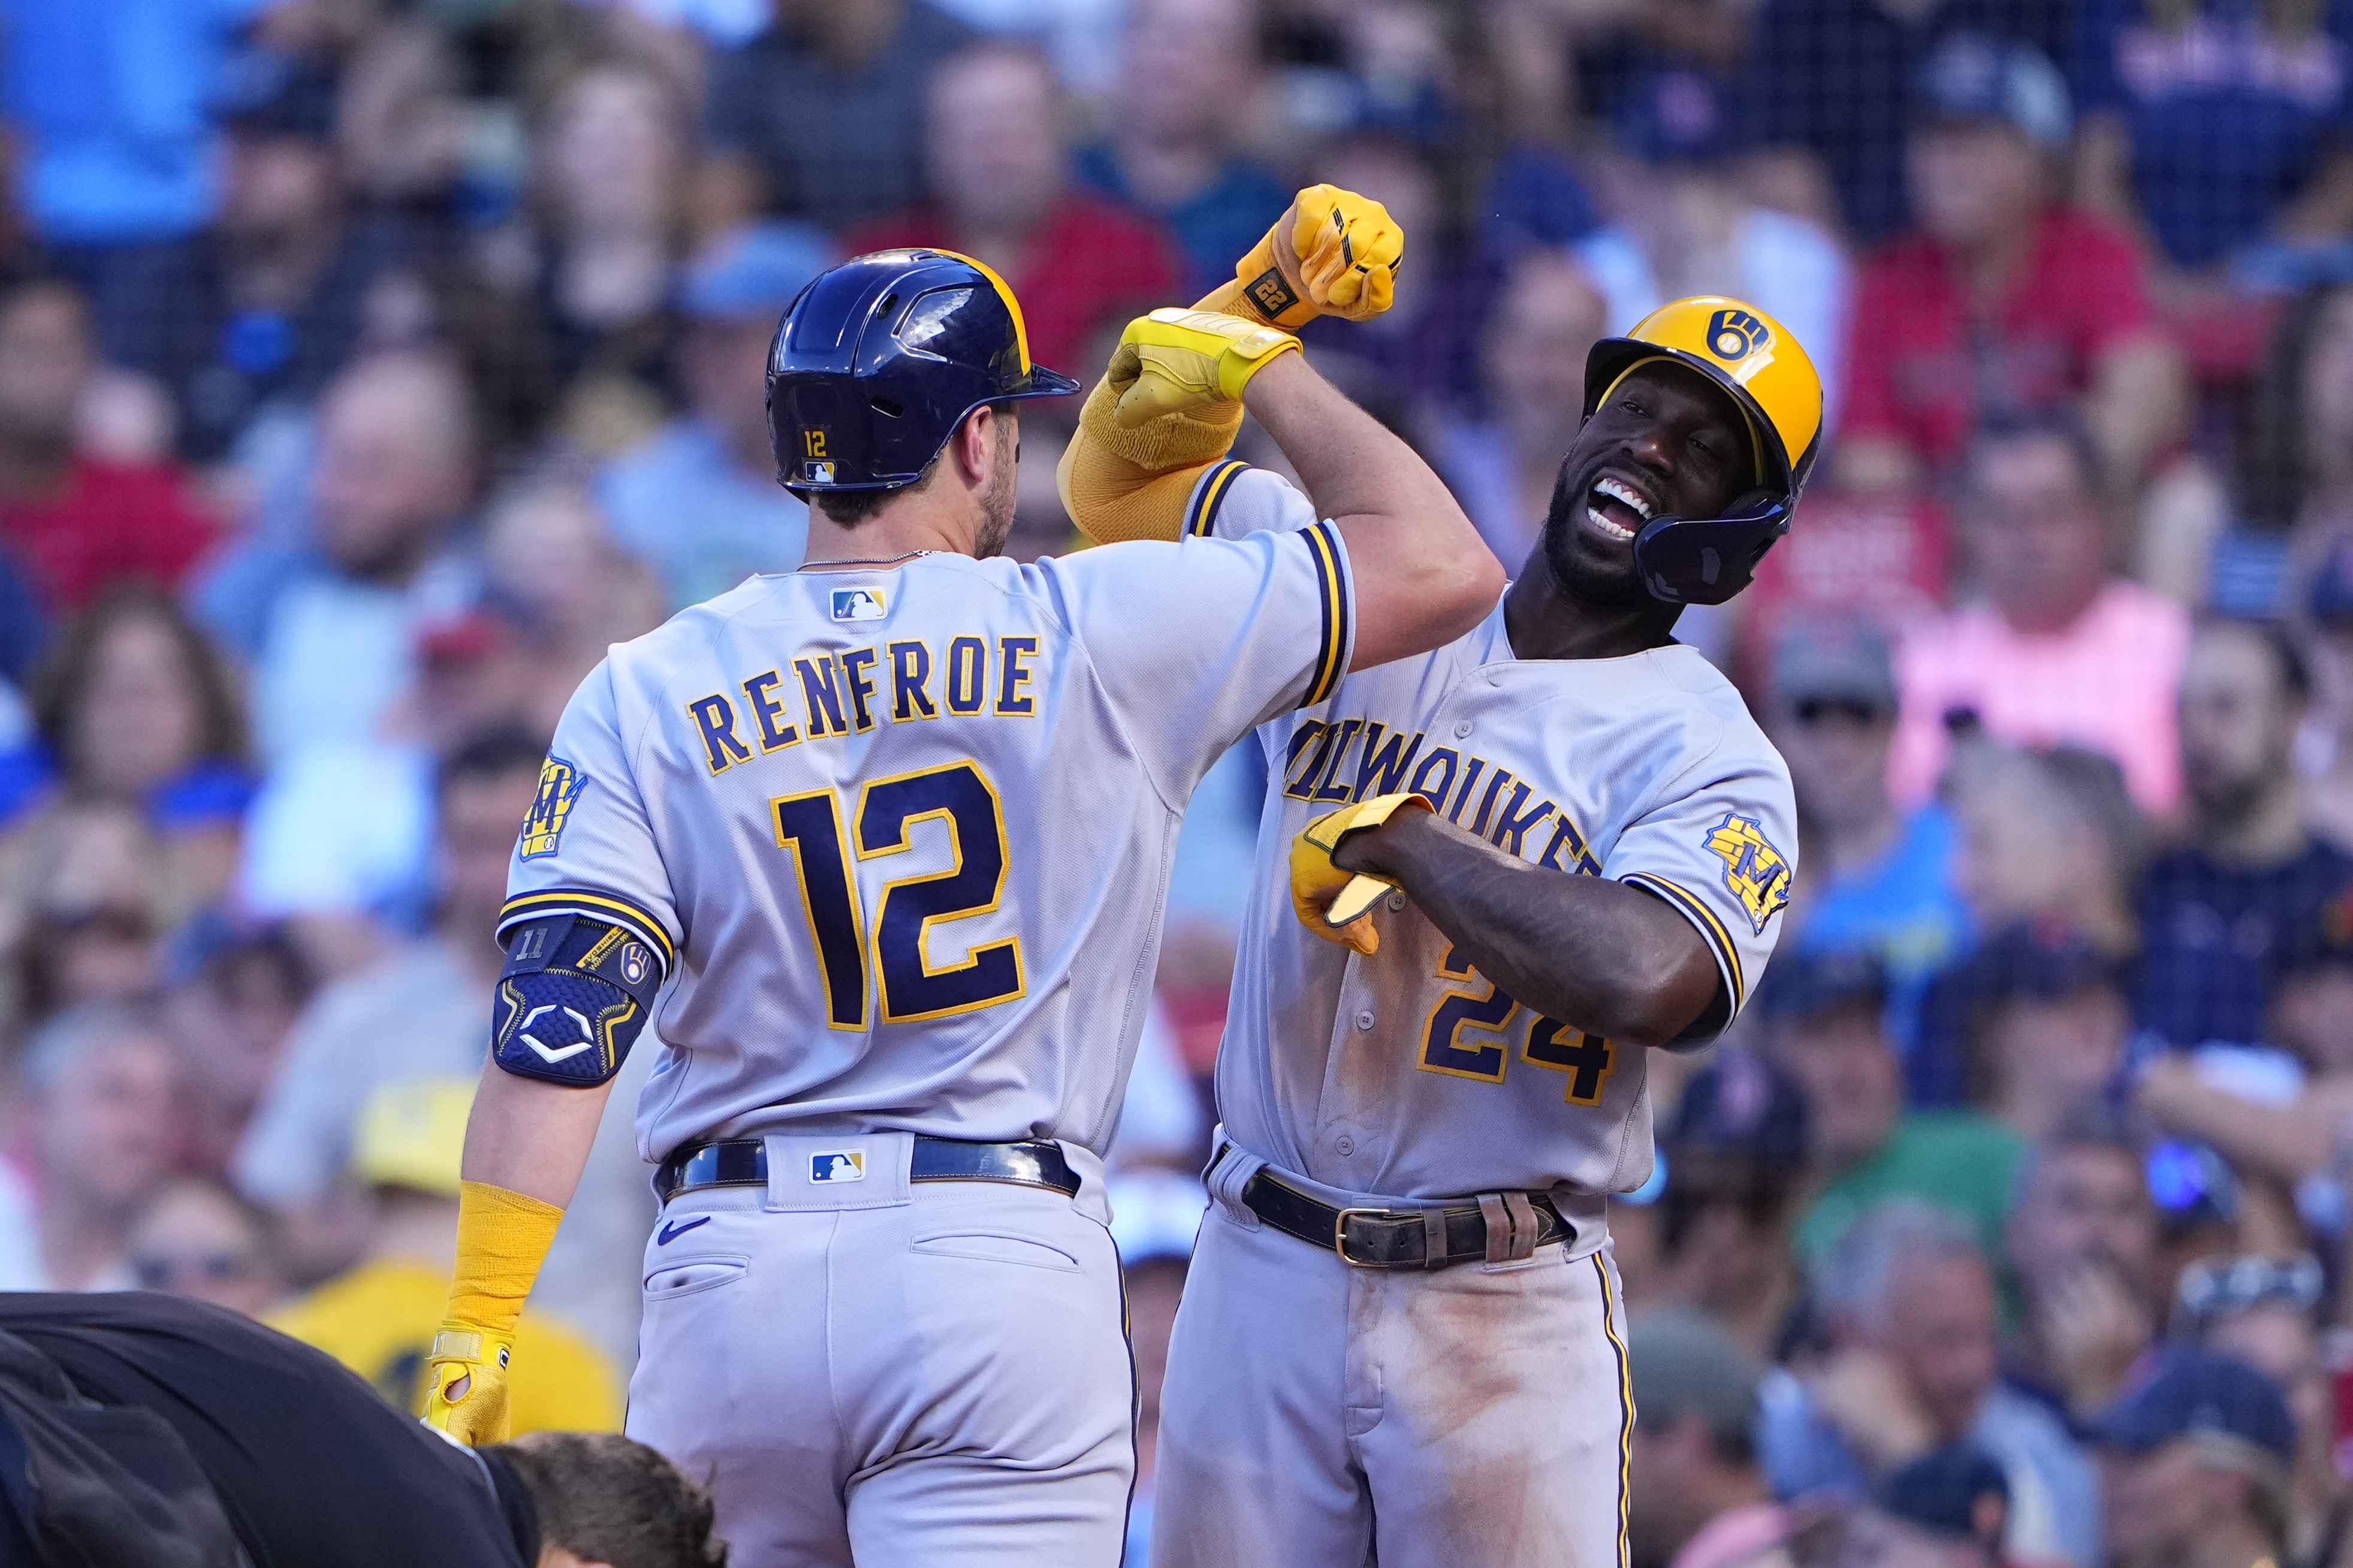 MLB: Milwaukee Brewers at Boston Red Sox